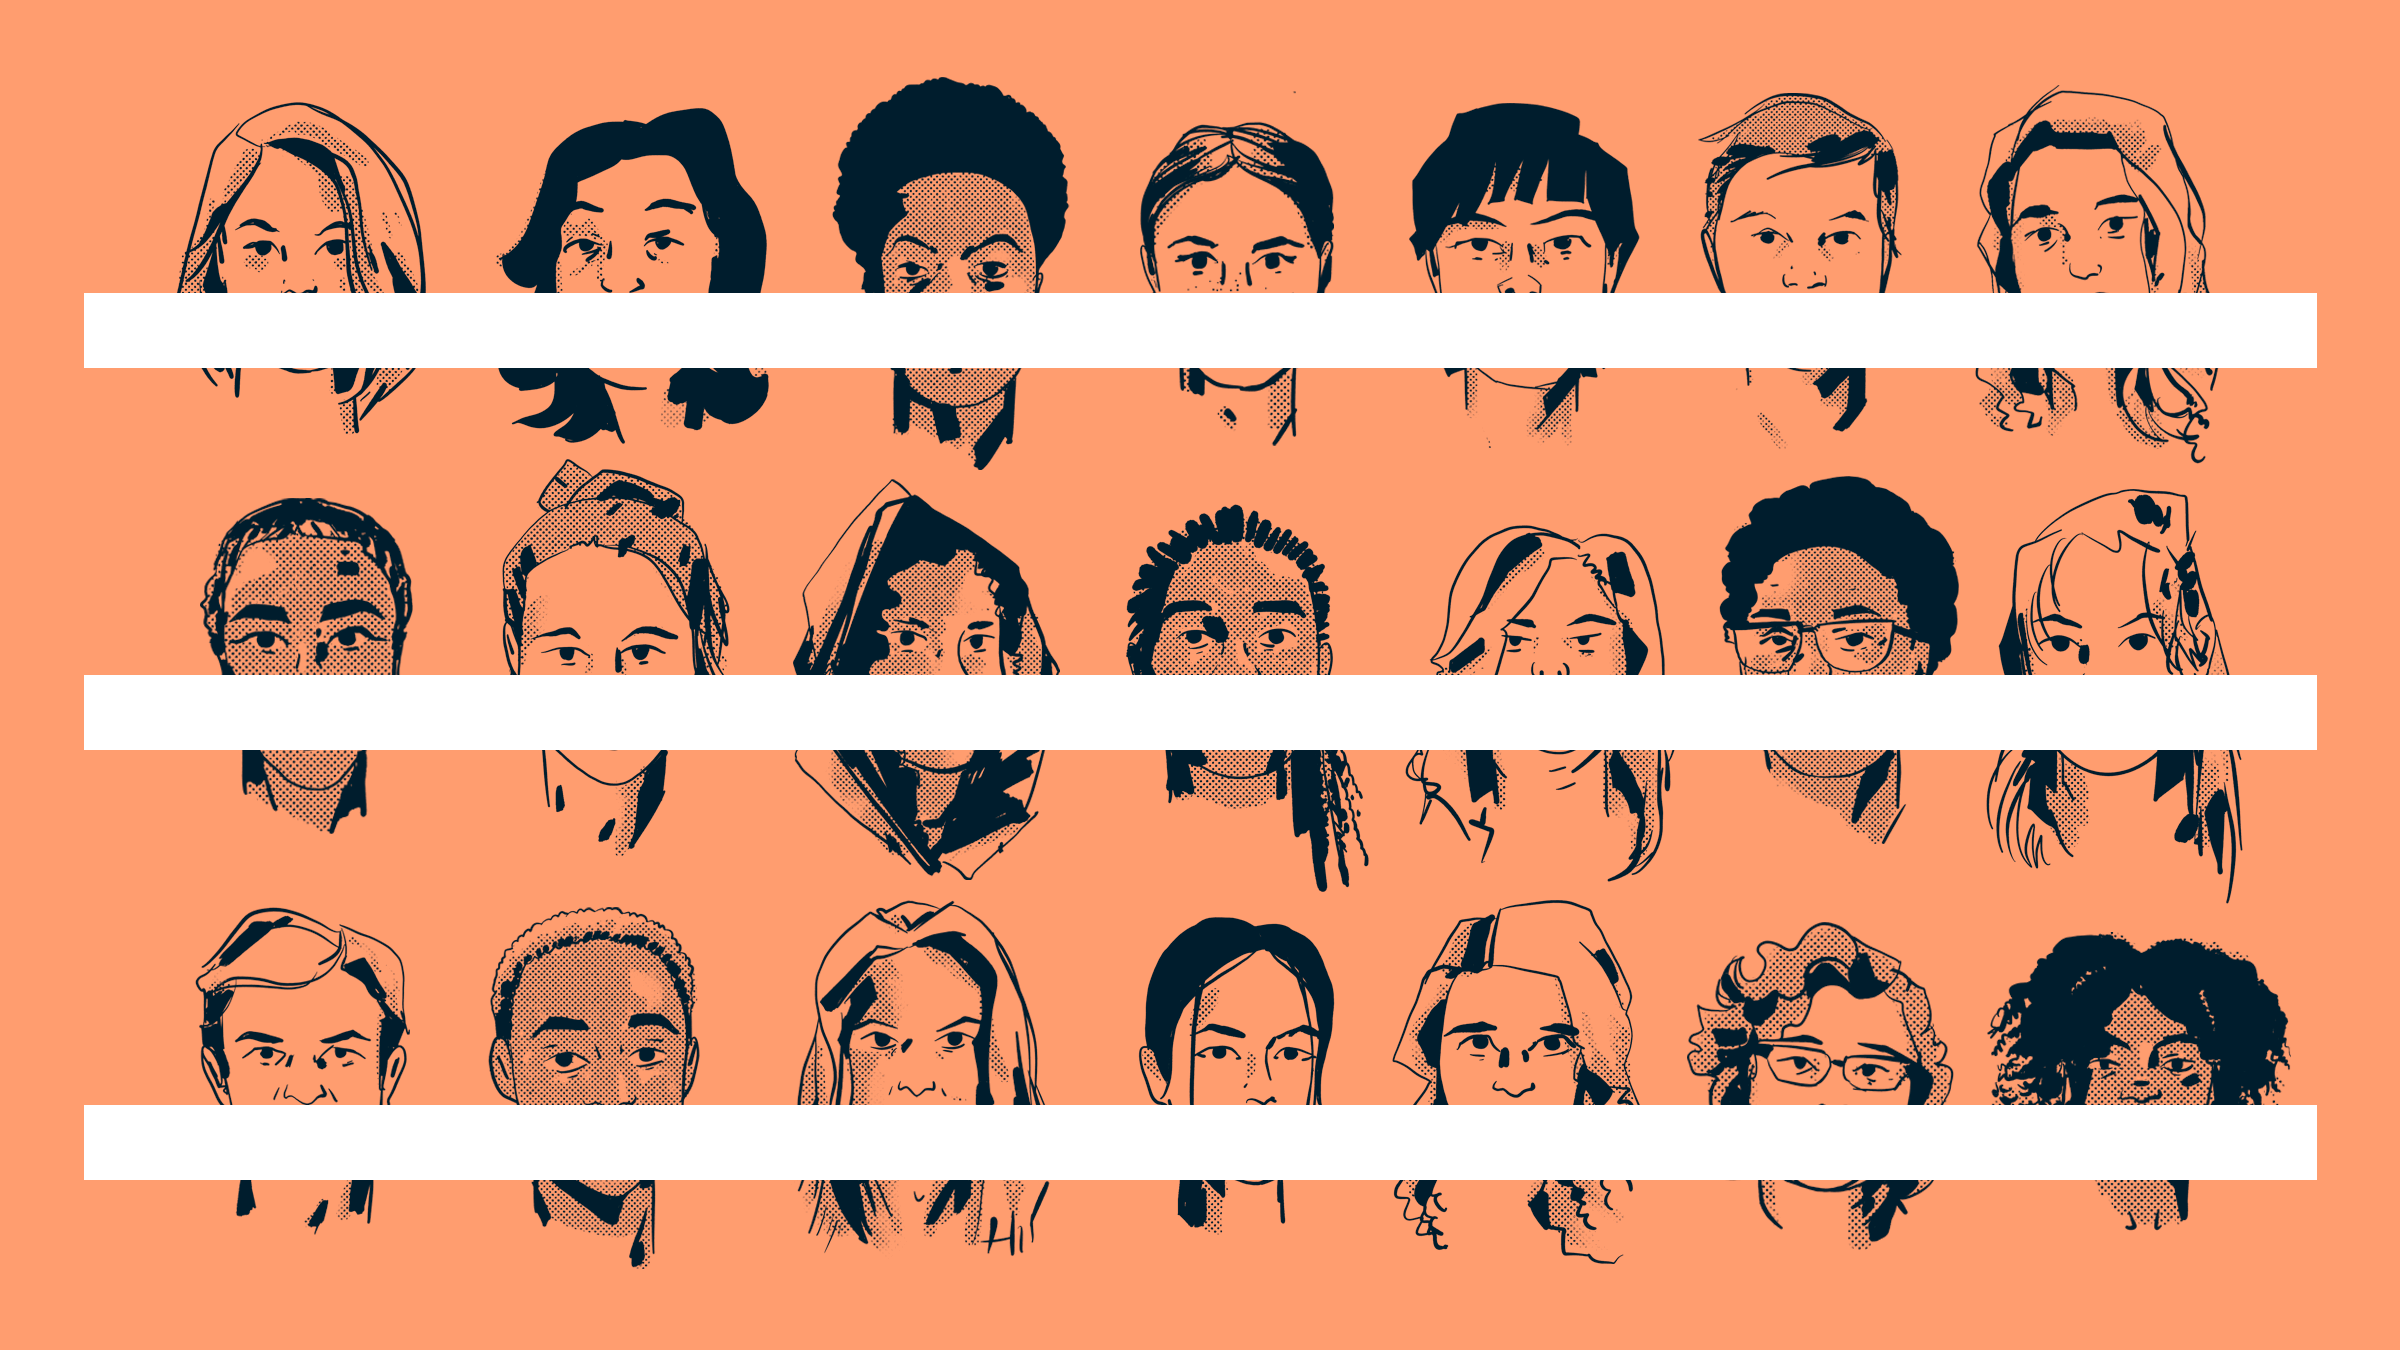 Three rows of women's faces. Over their mouths are white stripes.